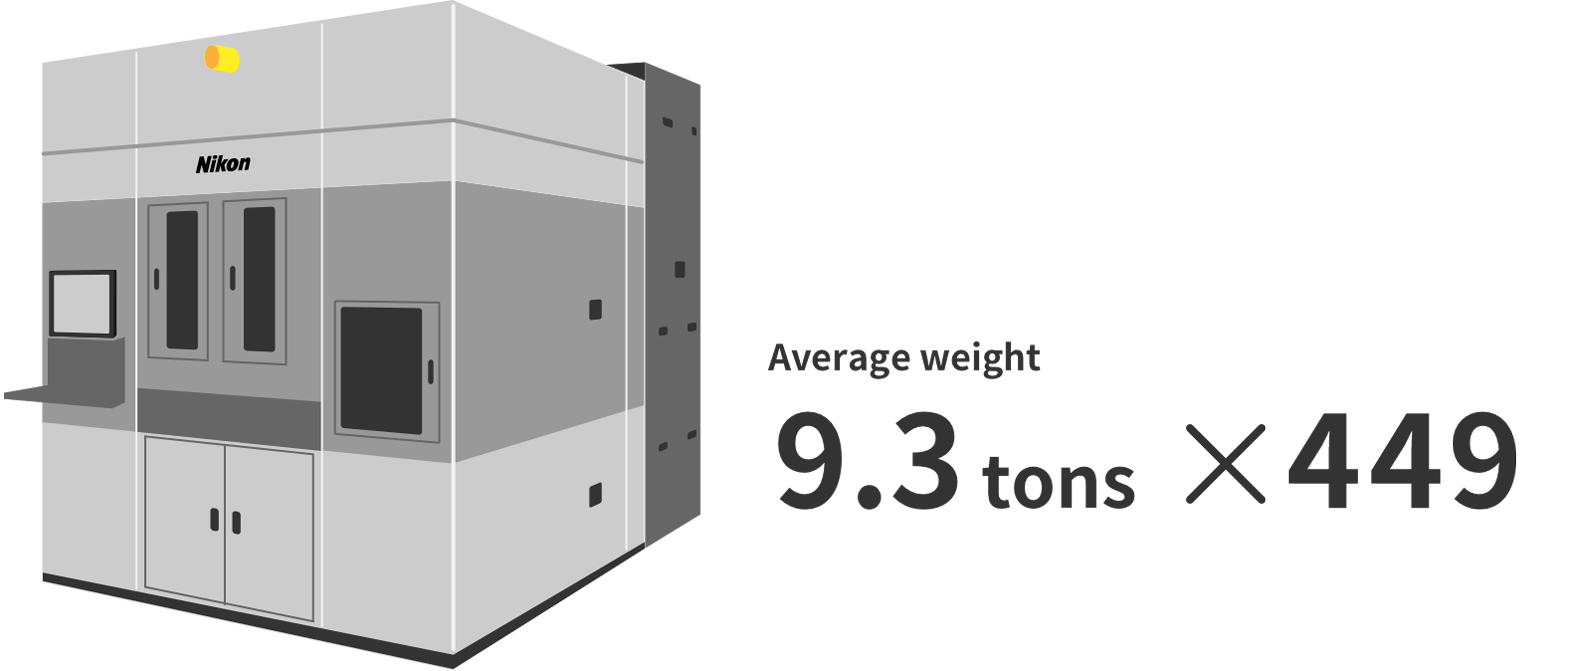 Average Weight 9.3tons * 449